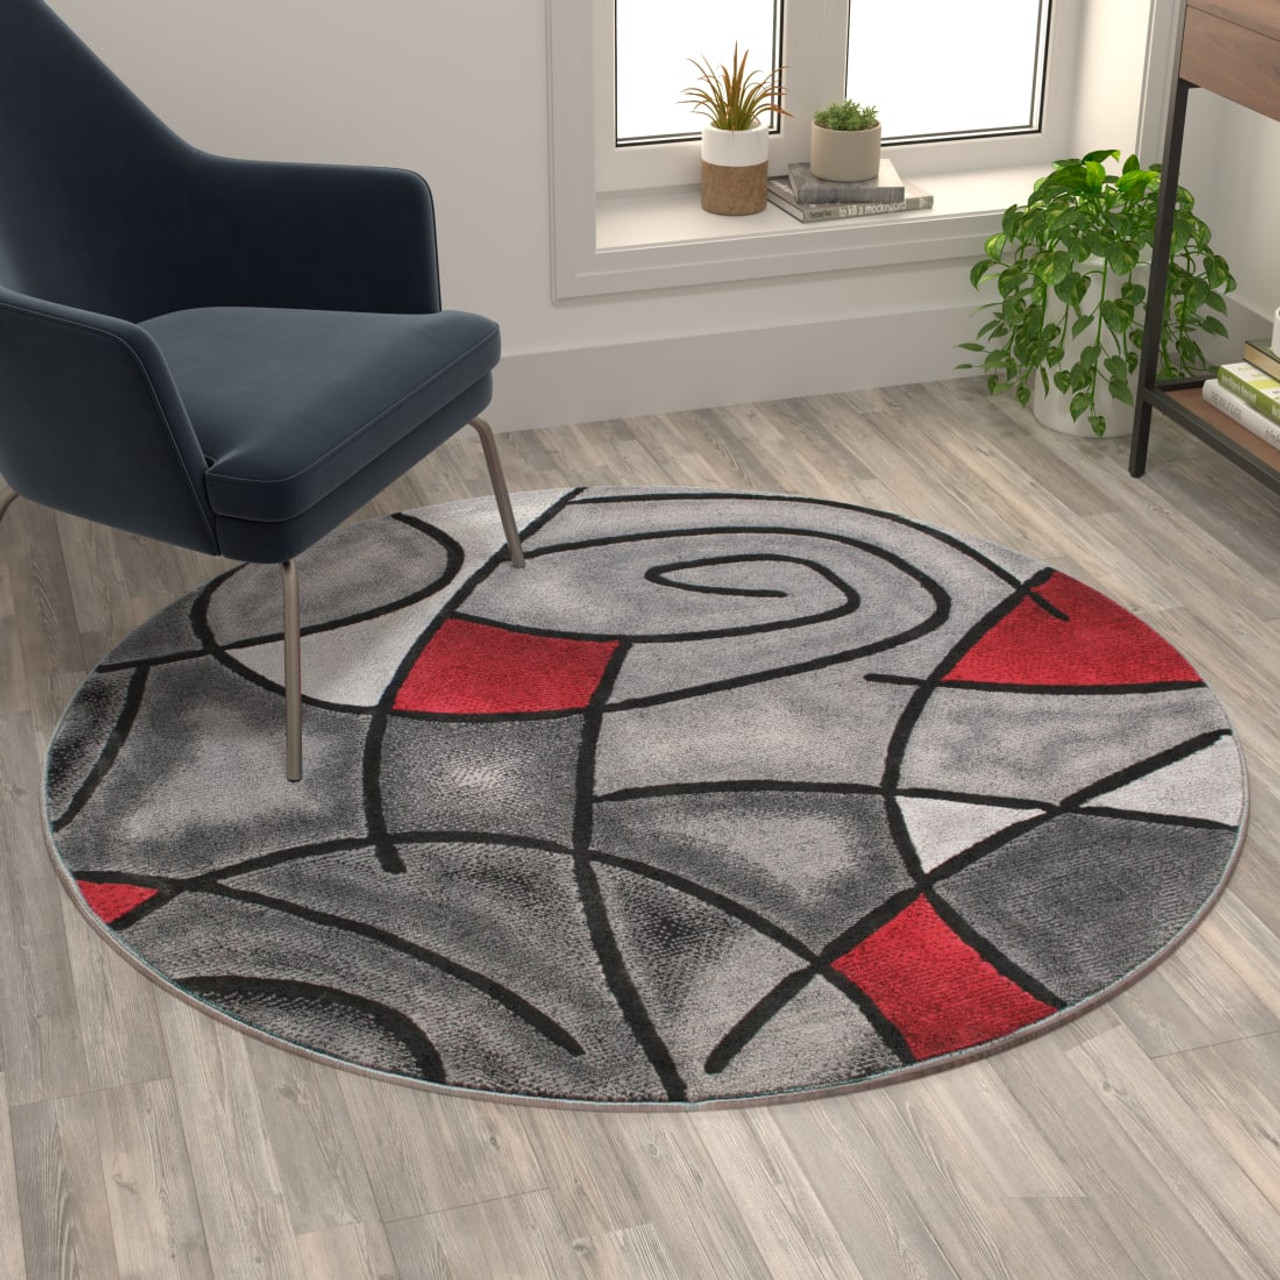 Jubilee Collection 5' x 5' Round Red Abstract Area Rug - Olefin Rug with Jute Backing